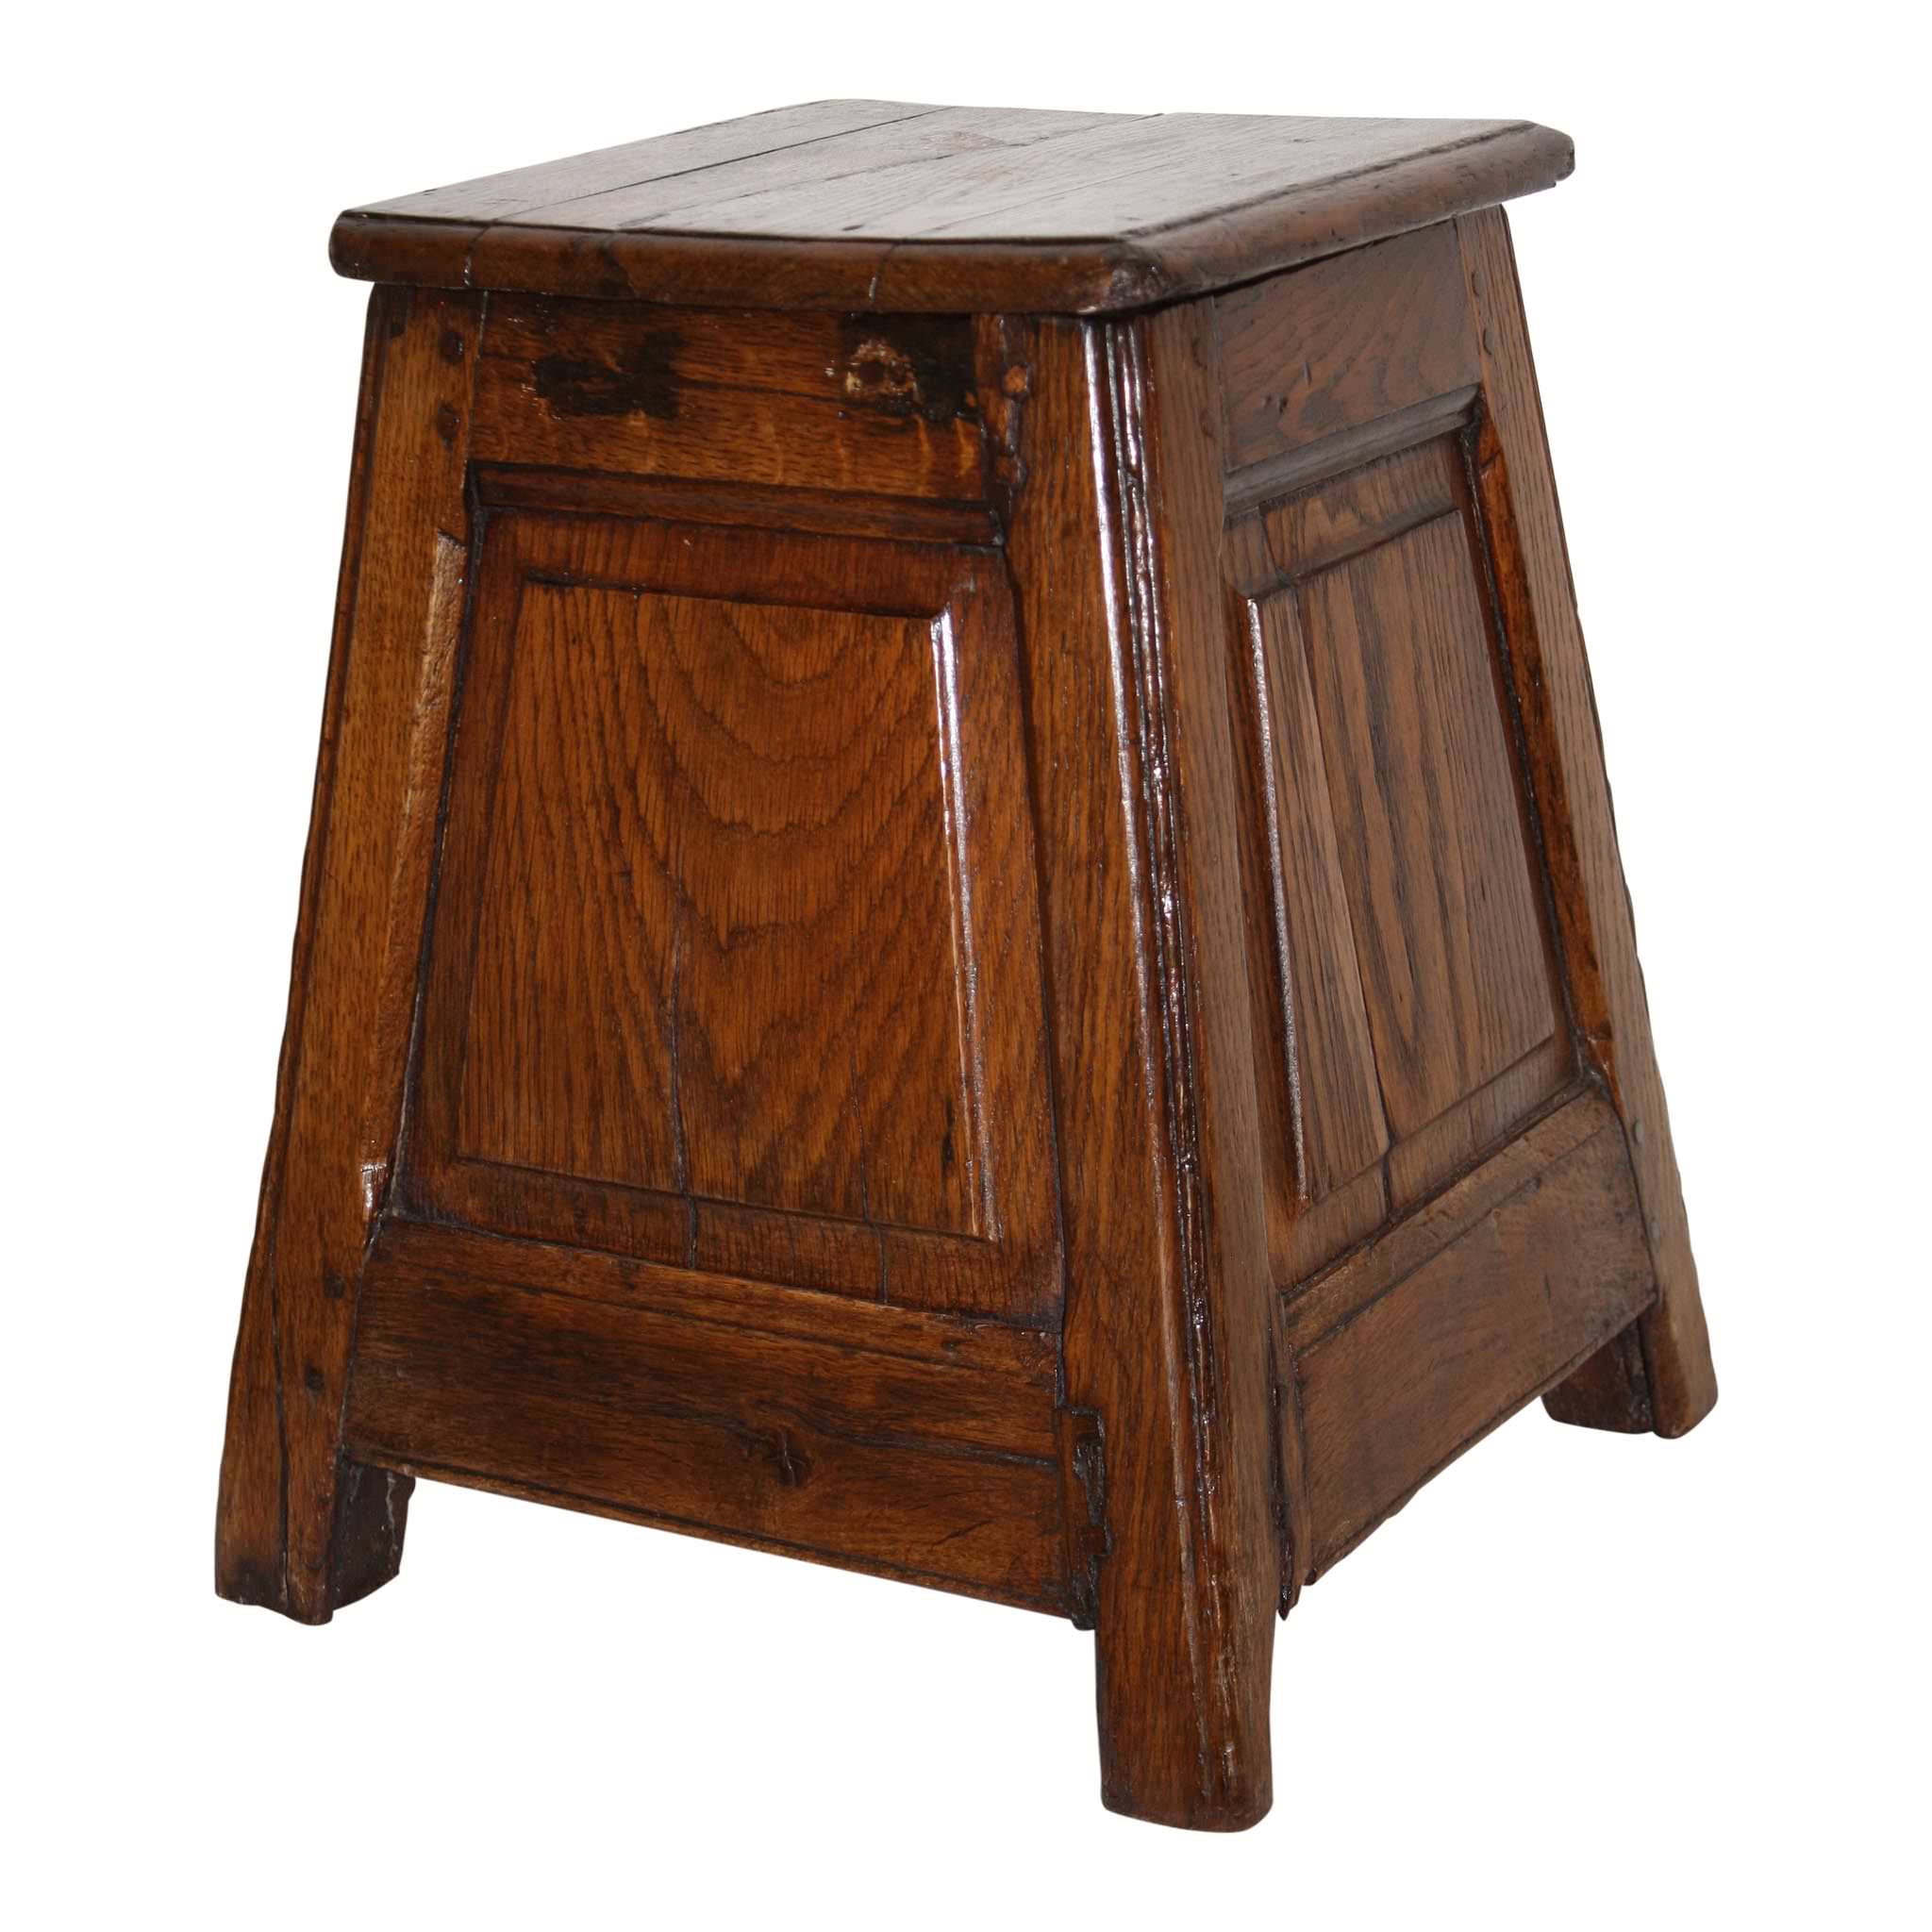 Small Square Side Table with Storage